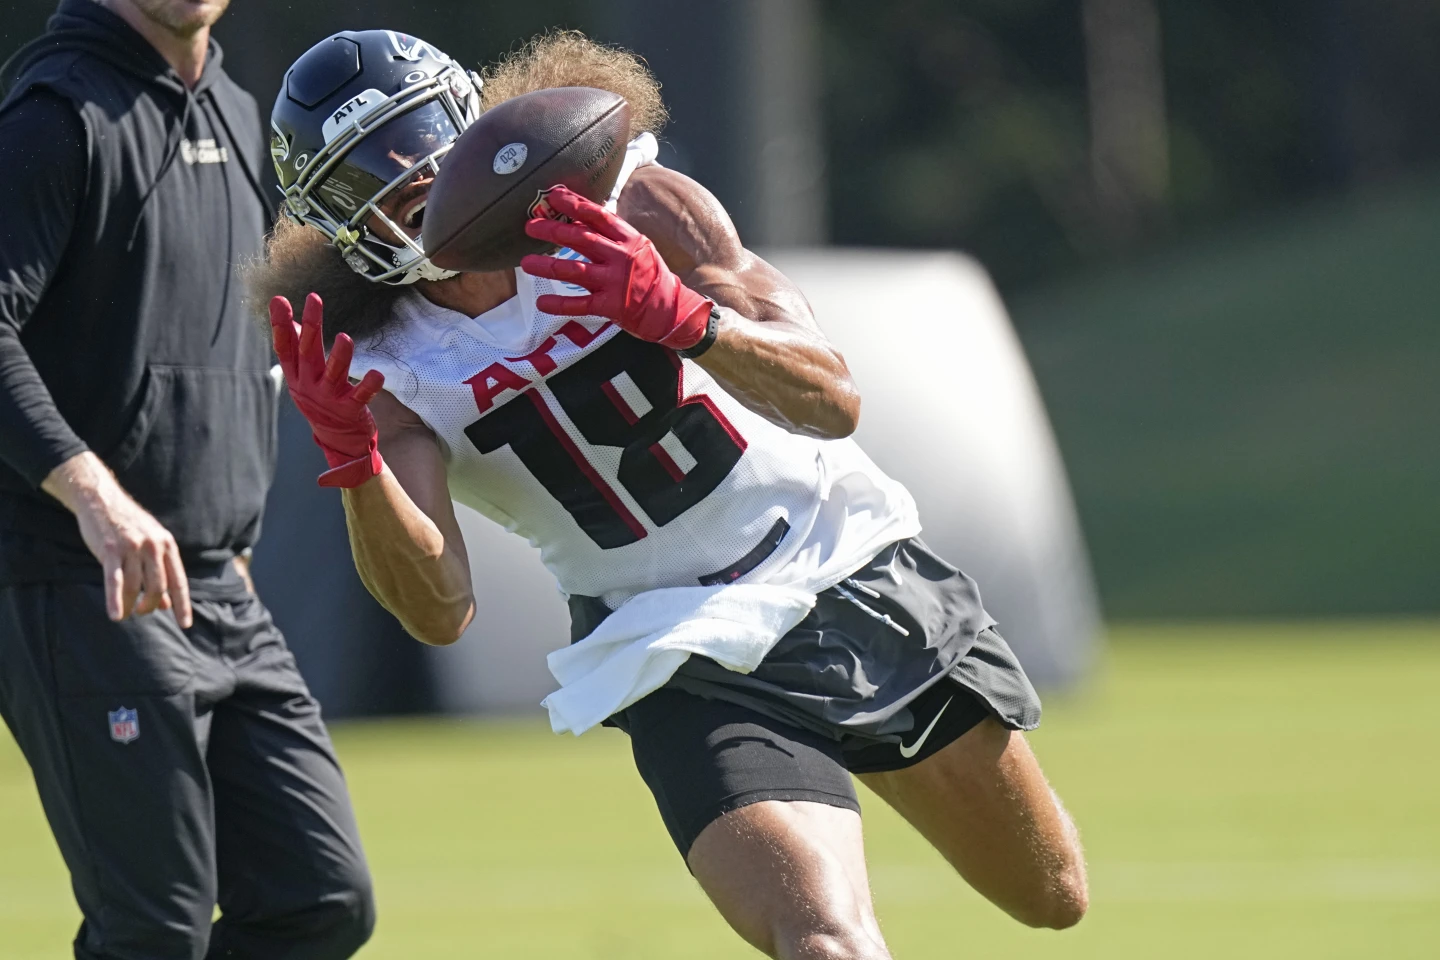 Mack Hollins adds size and eccentric outlook to Falcons attack at wide receiver